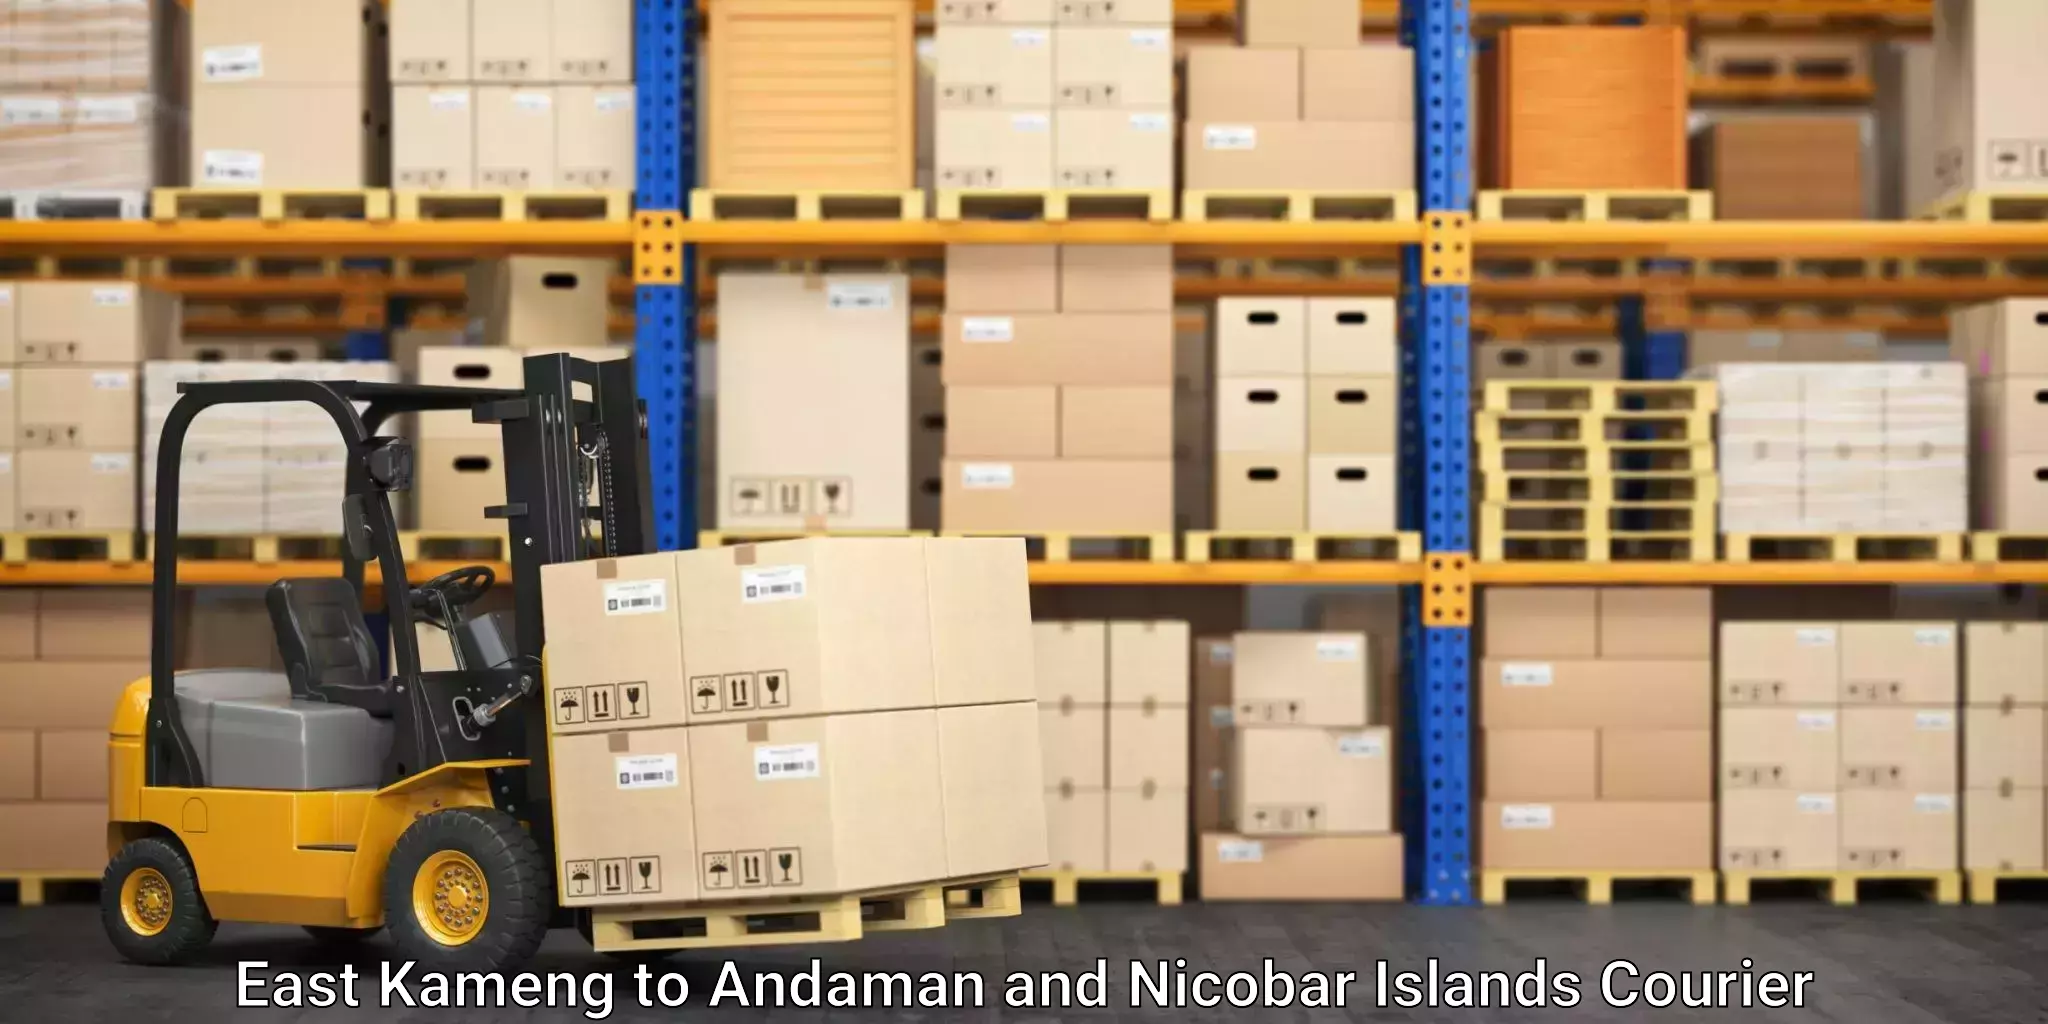 Tech-enabled shipping in East Kameng to Andaman and Nicobar Islands